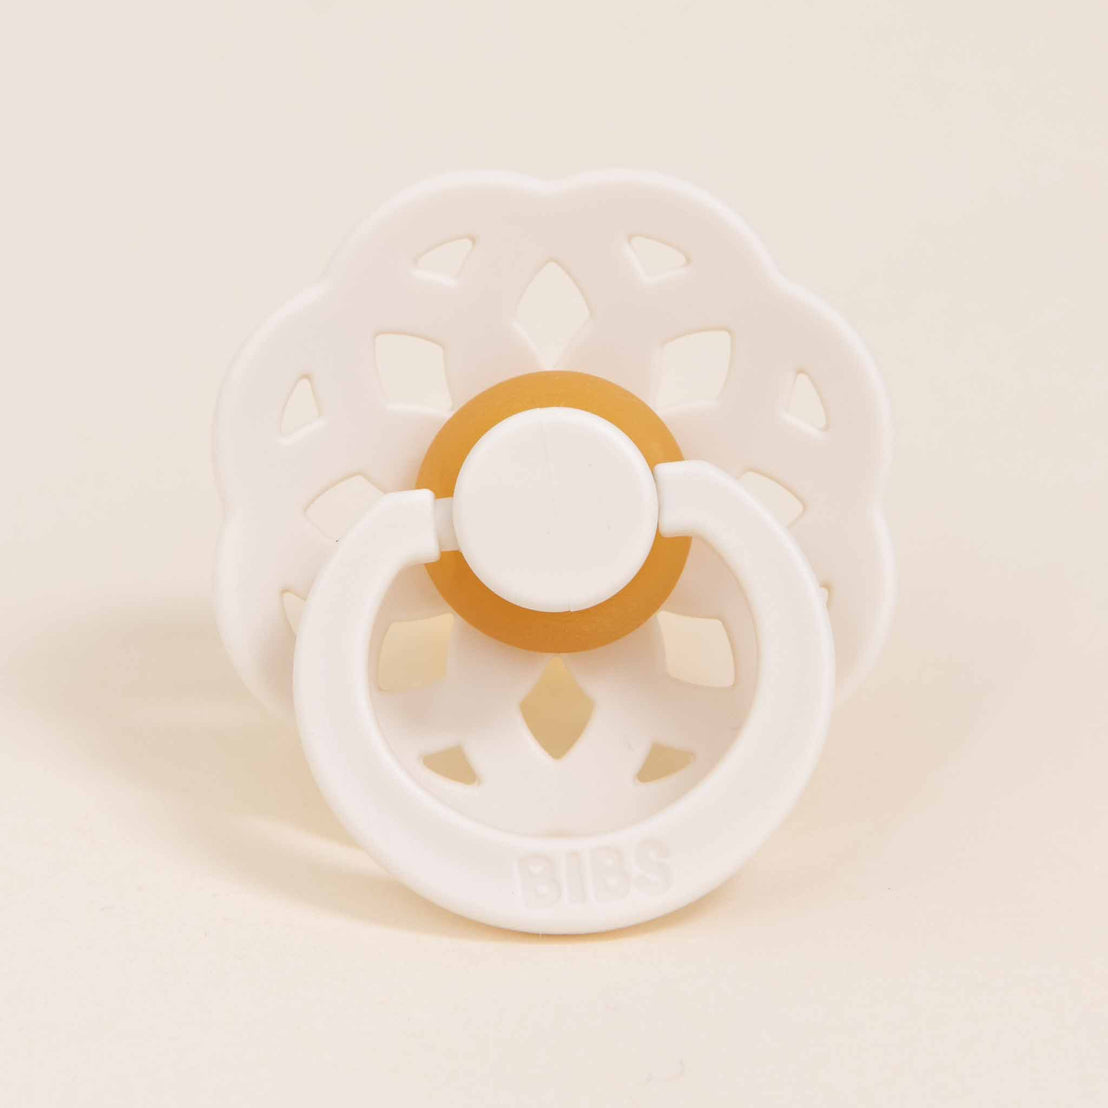 The Ava pacifier in ivory with a flower-shaped silicone pacifier and button center labeled "Bibs" on a beige background.